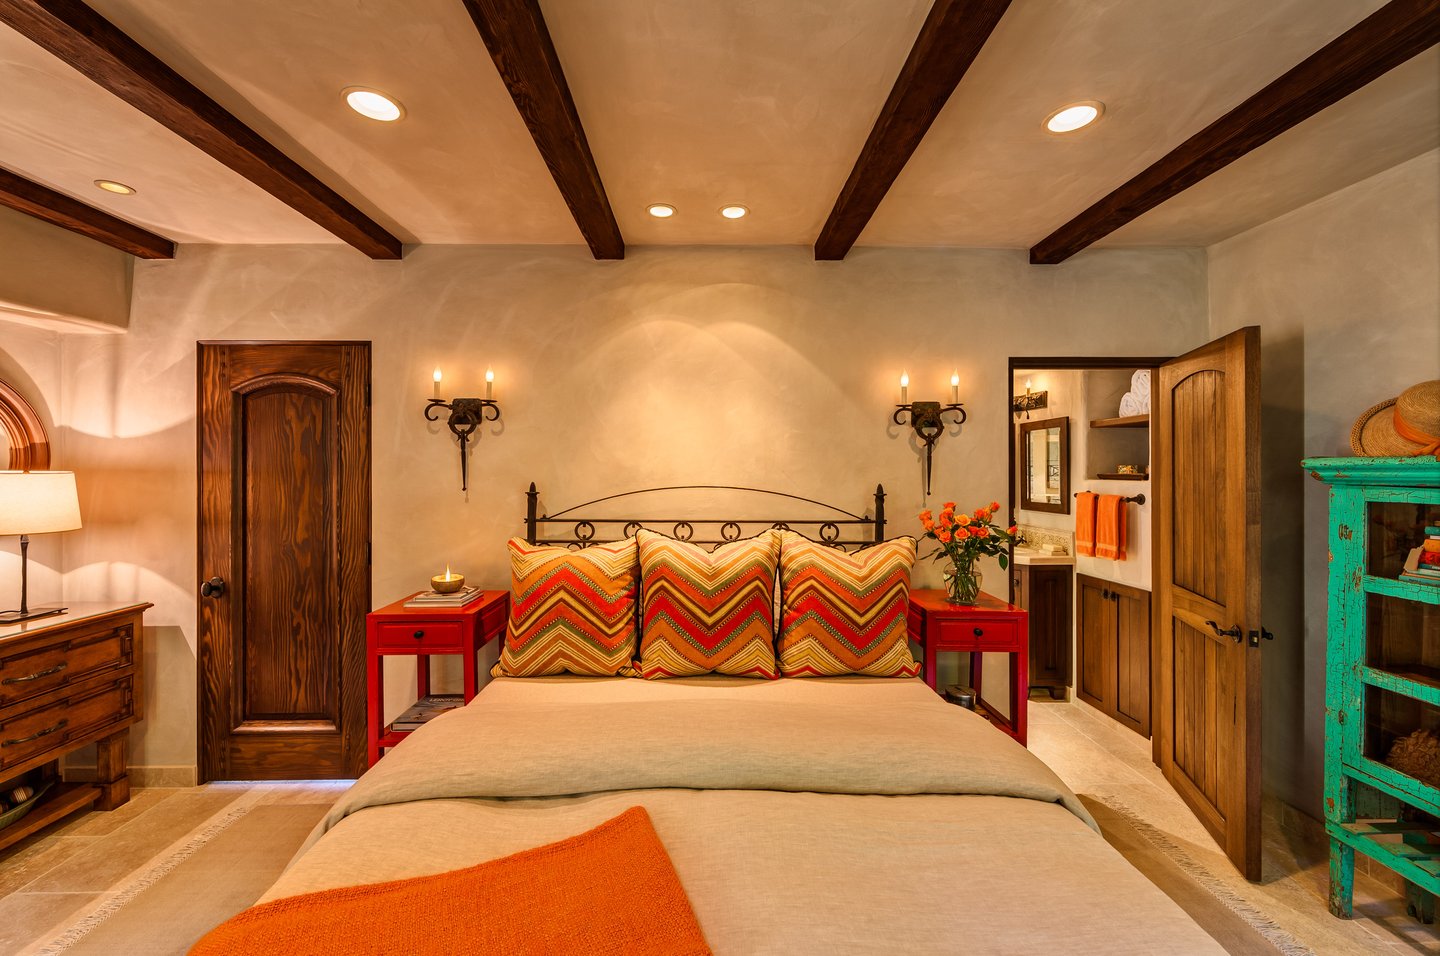 Front view of bedroom with antique furniture and wood ceiling beams.